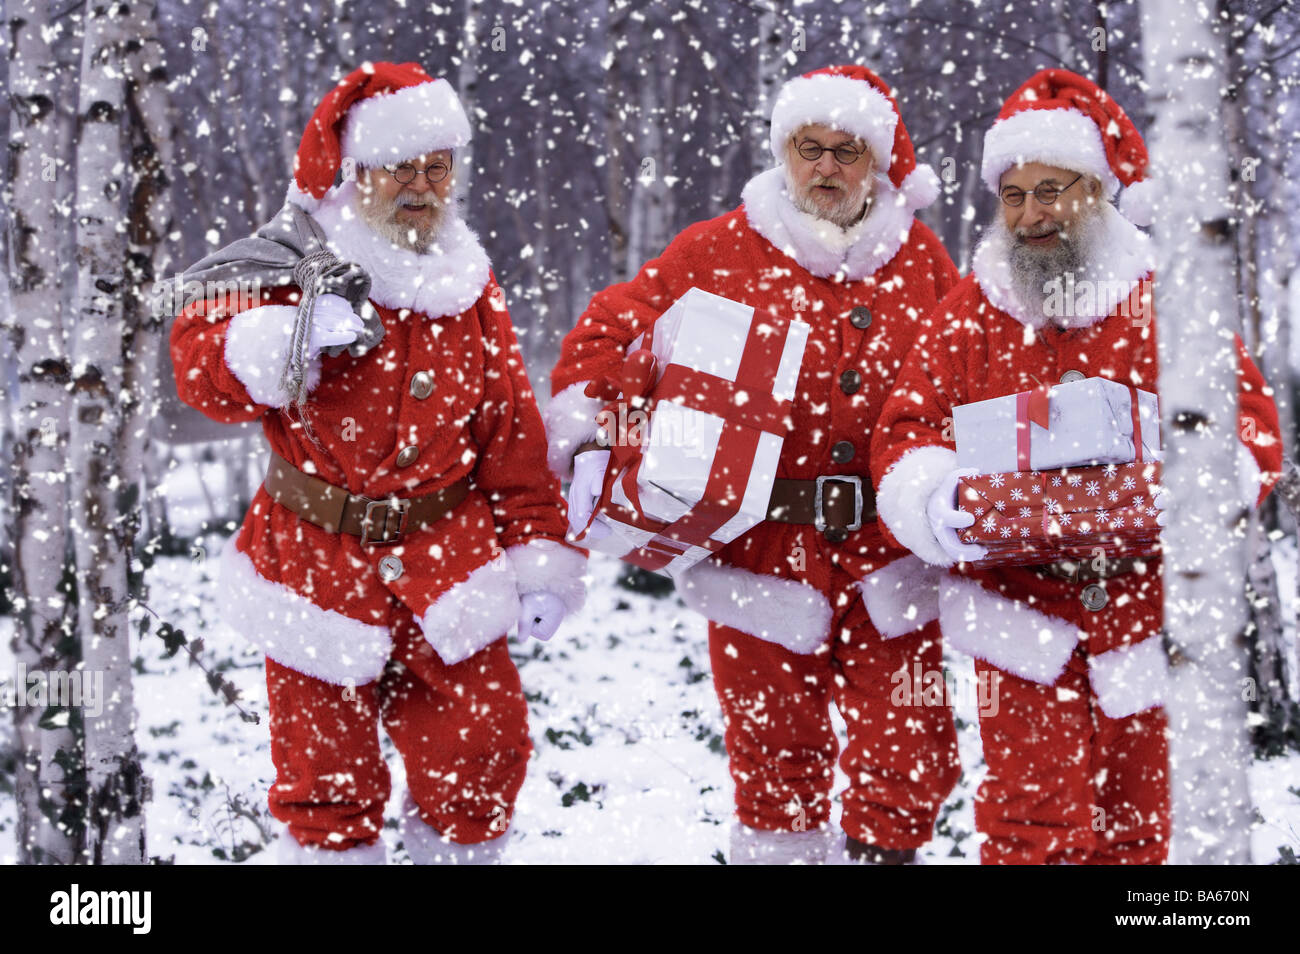 People carry forest flurries Santa Claus gifts Christmas men three disguise outfits glasses beards Christmas-gifts delivers Stock Photo